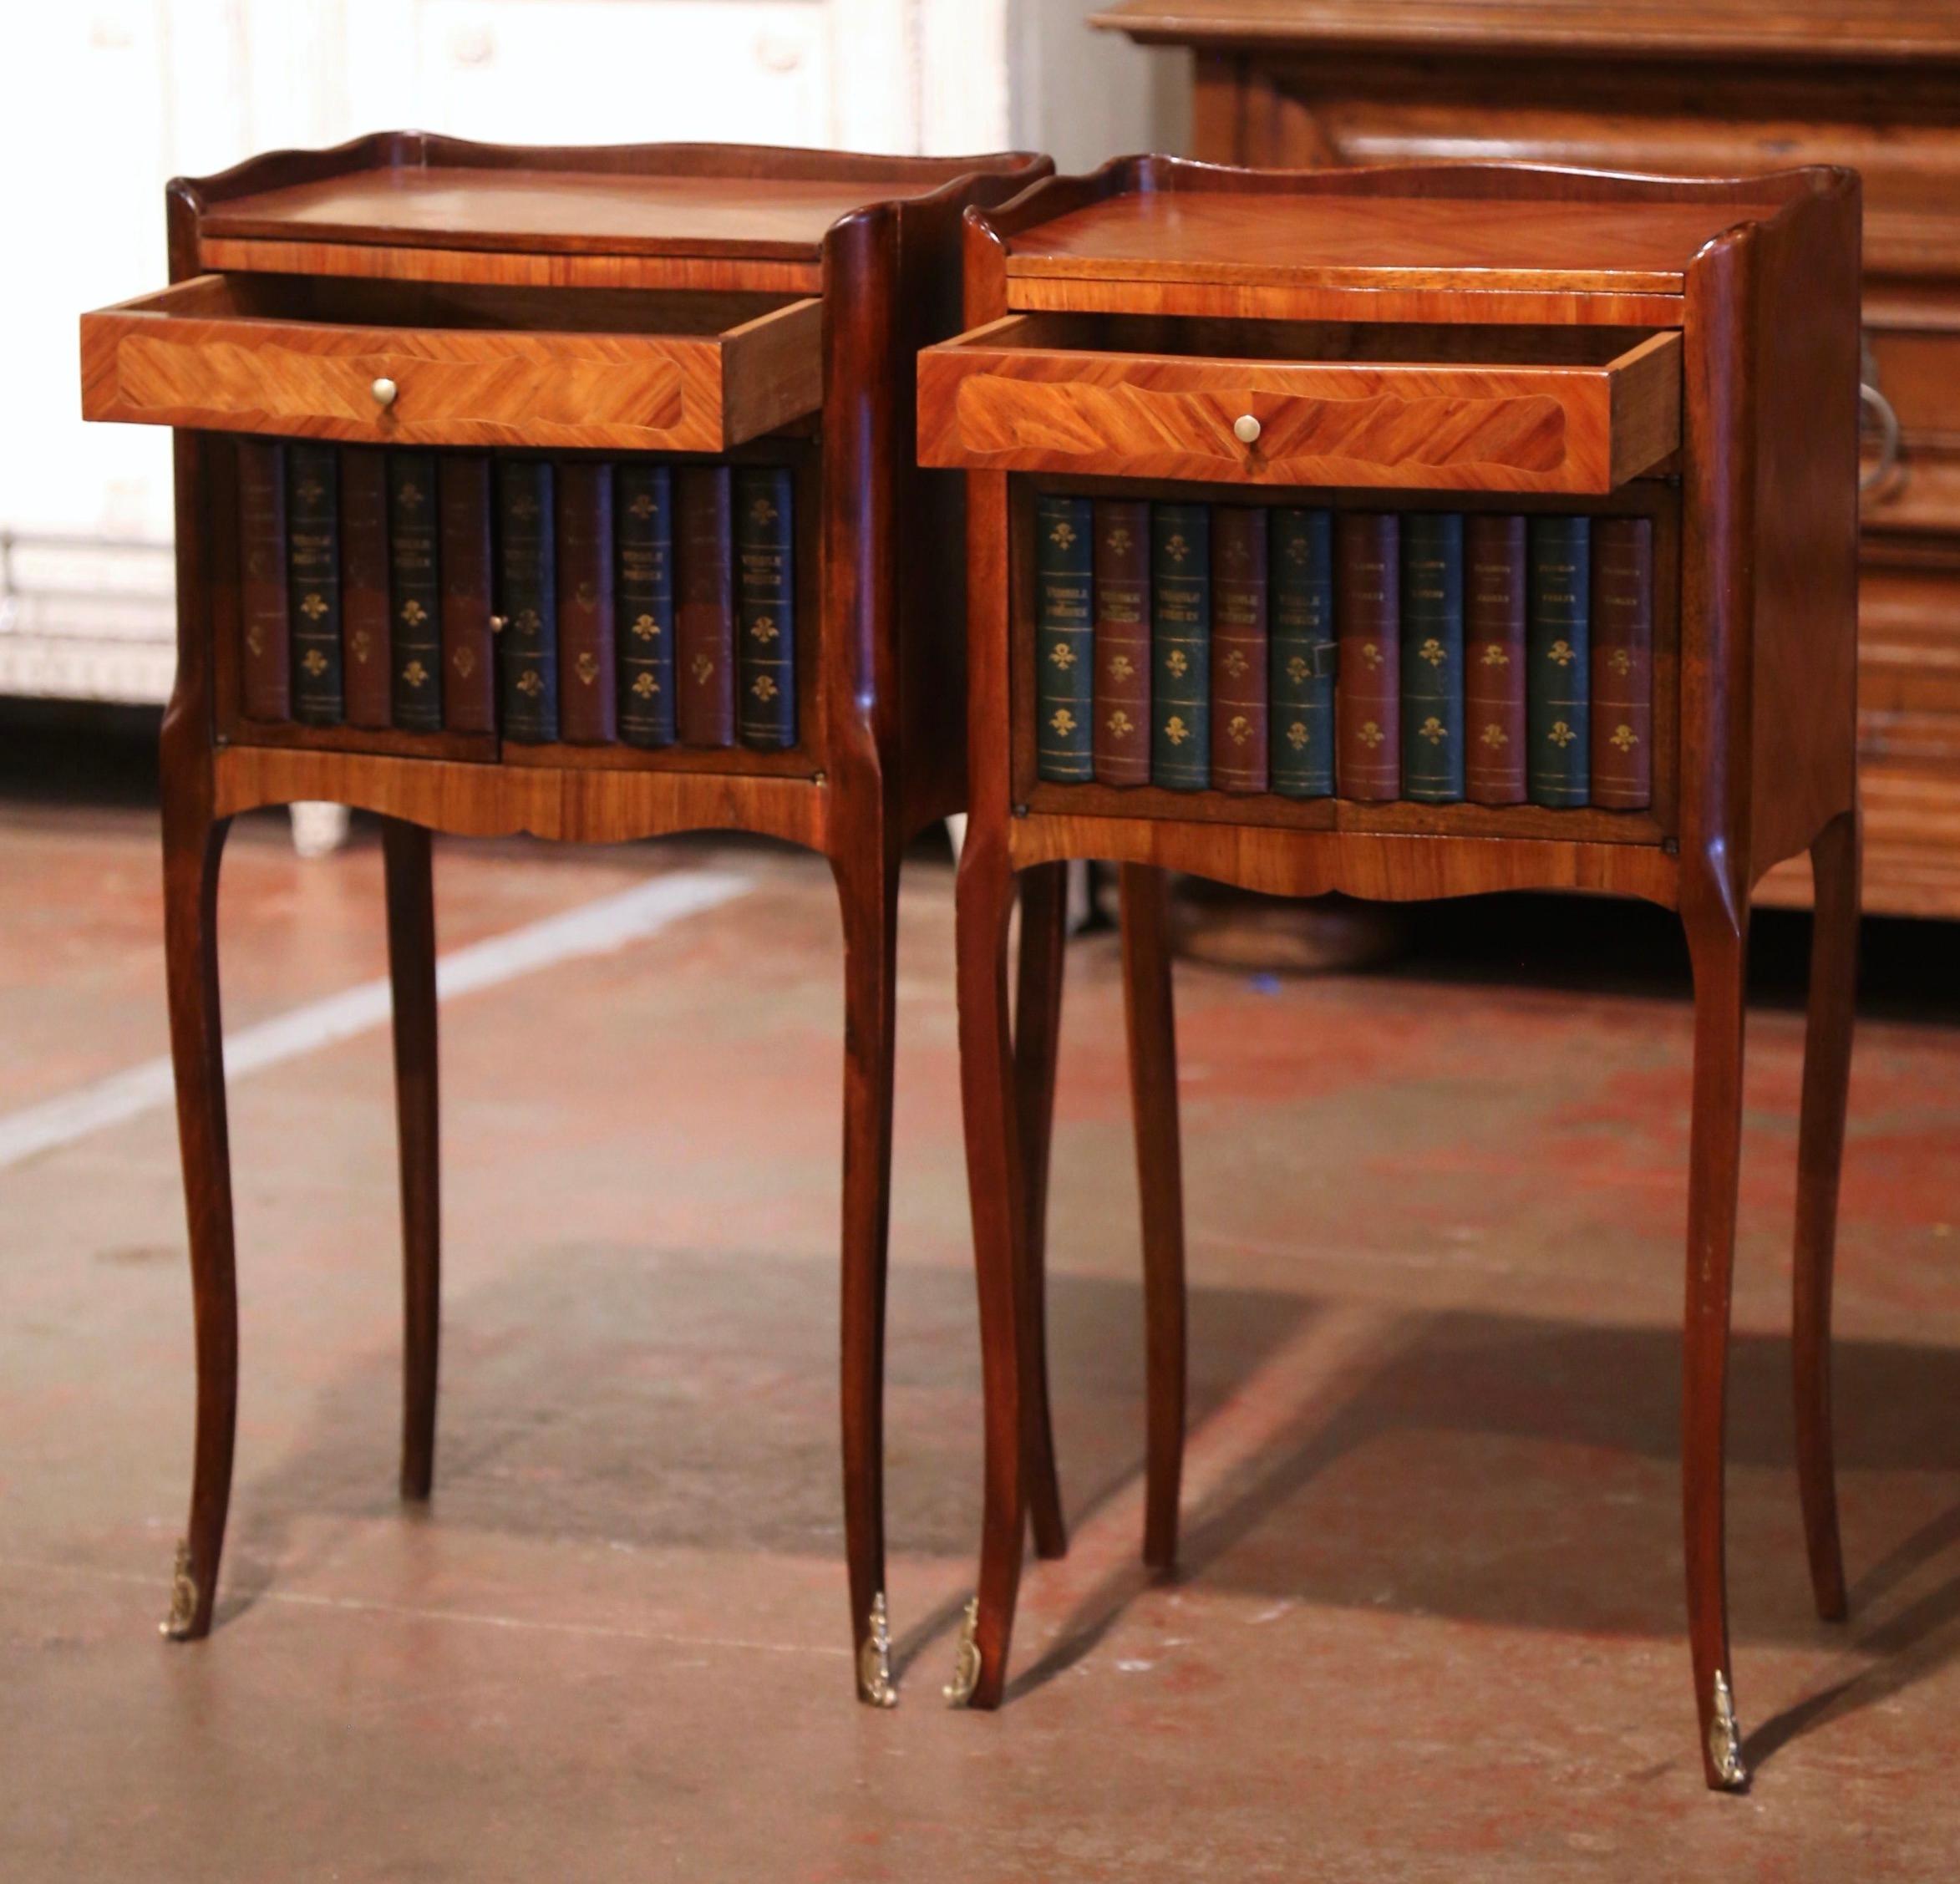 Pair of 19th Century French Walnut Nightstands with Leather Book Spine Doors For Sale 5